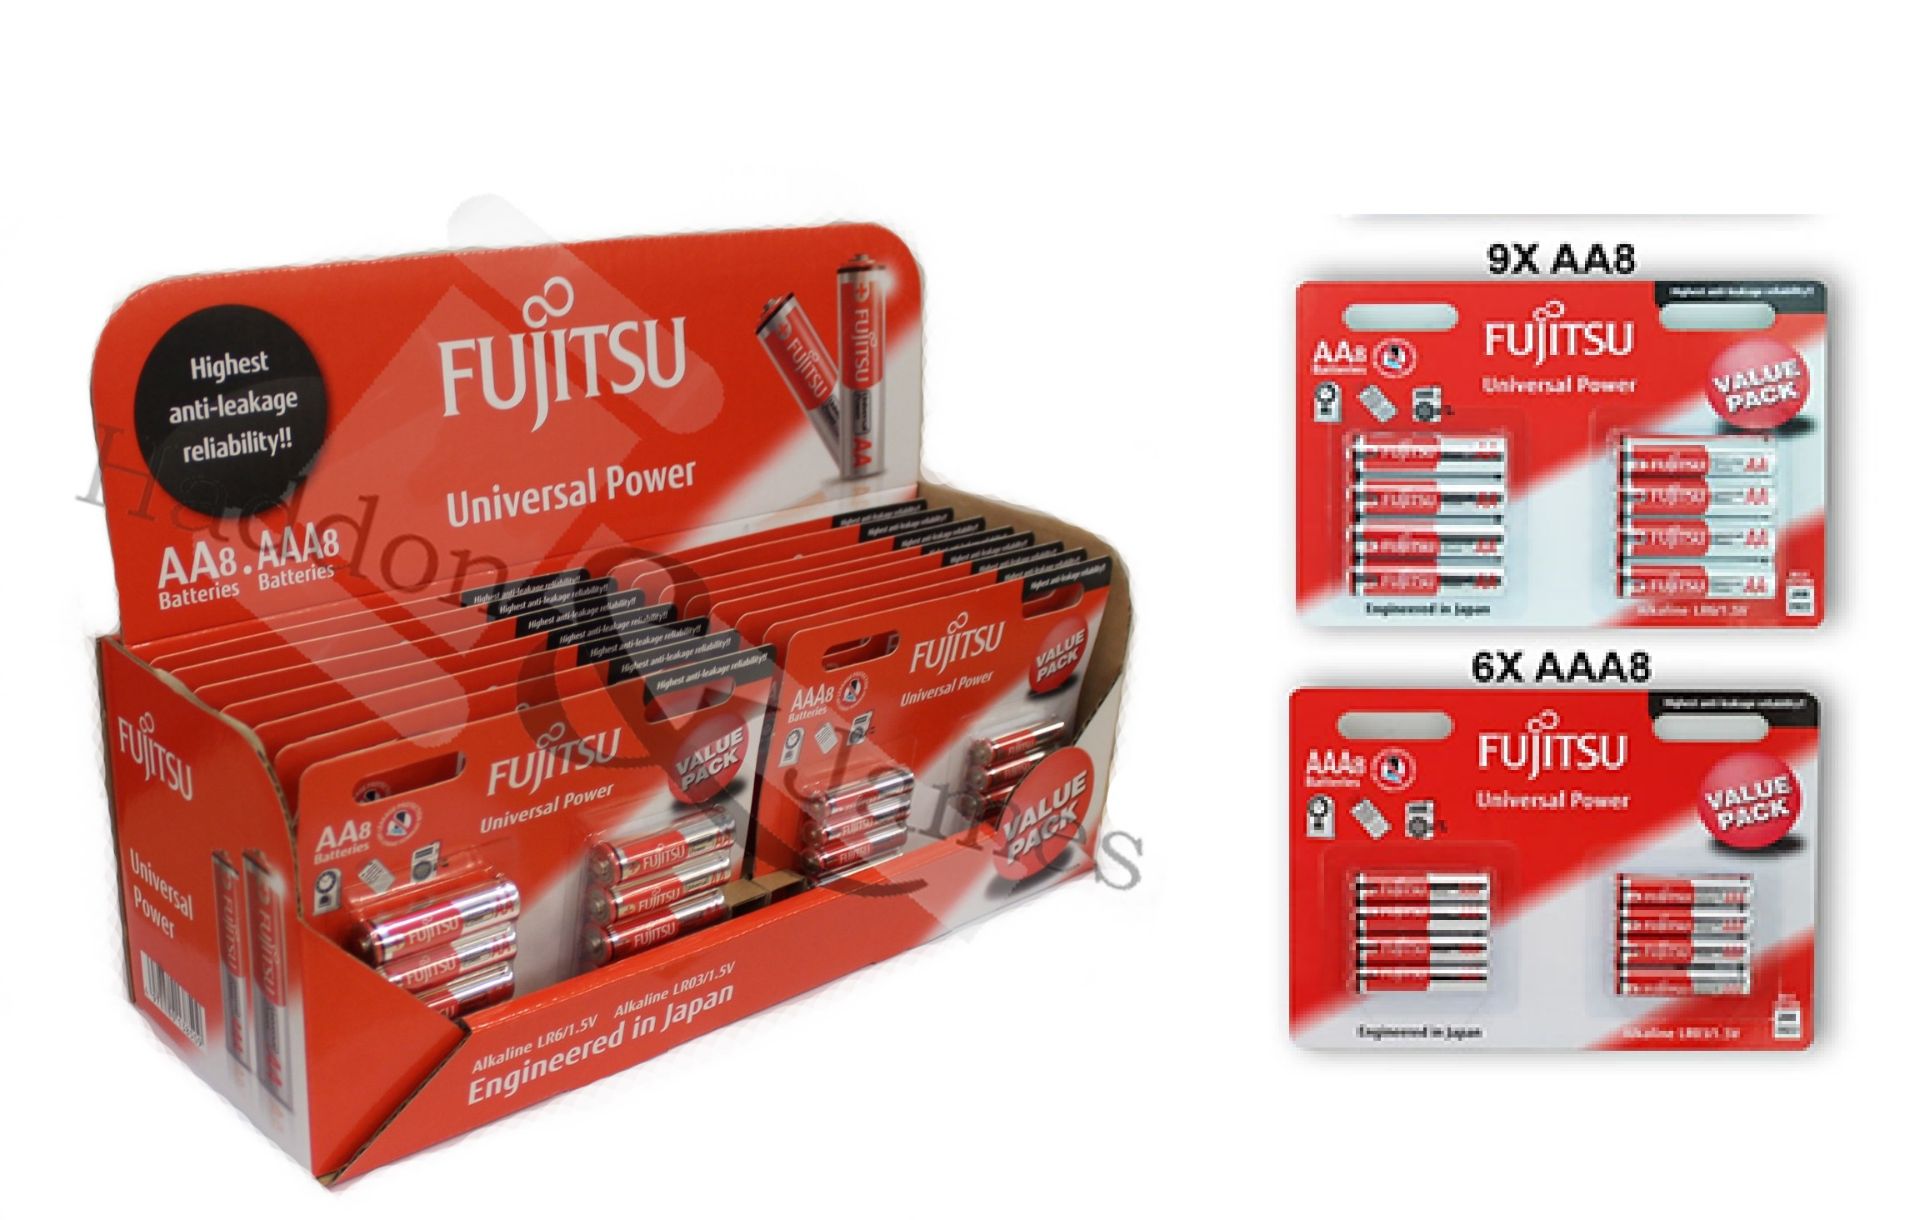 V *TRADE QTY* Brand New Fujistu Universal Power Assorted Pack of Alkaline Batteries (Contains 120 AA